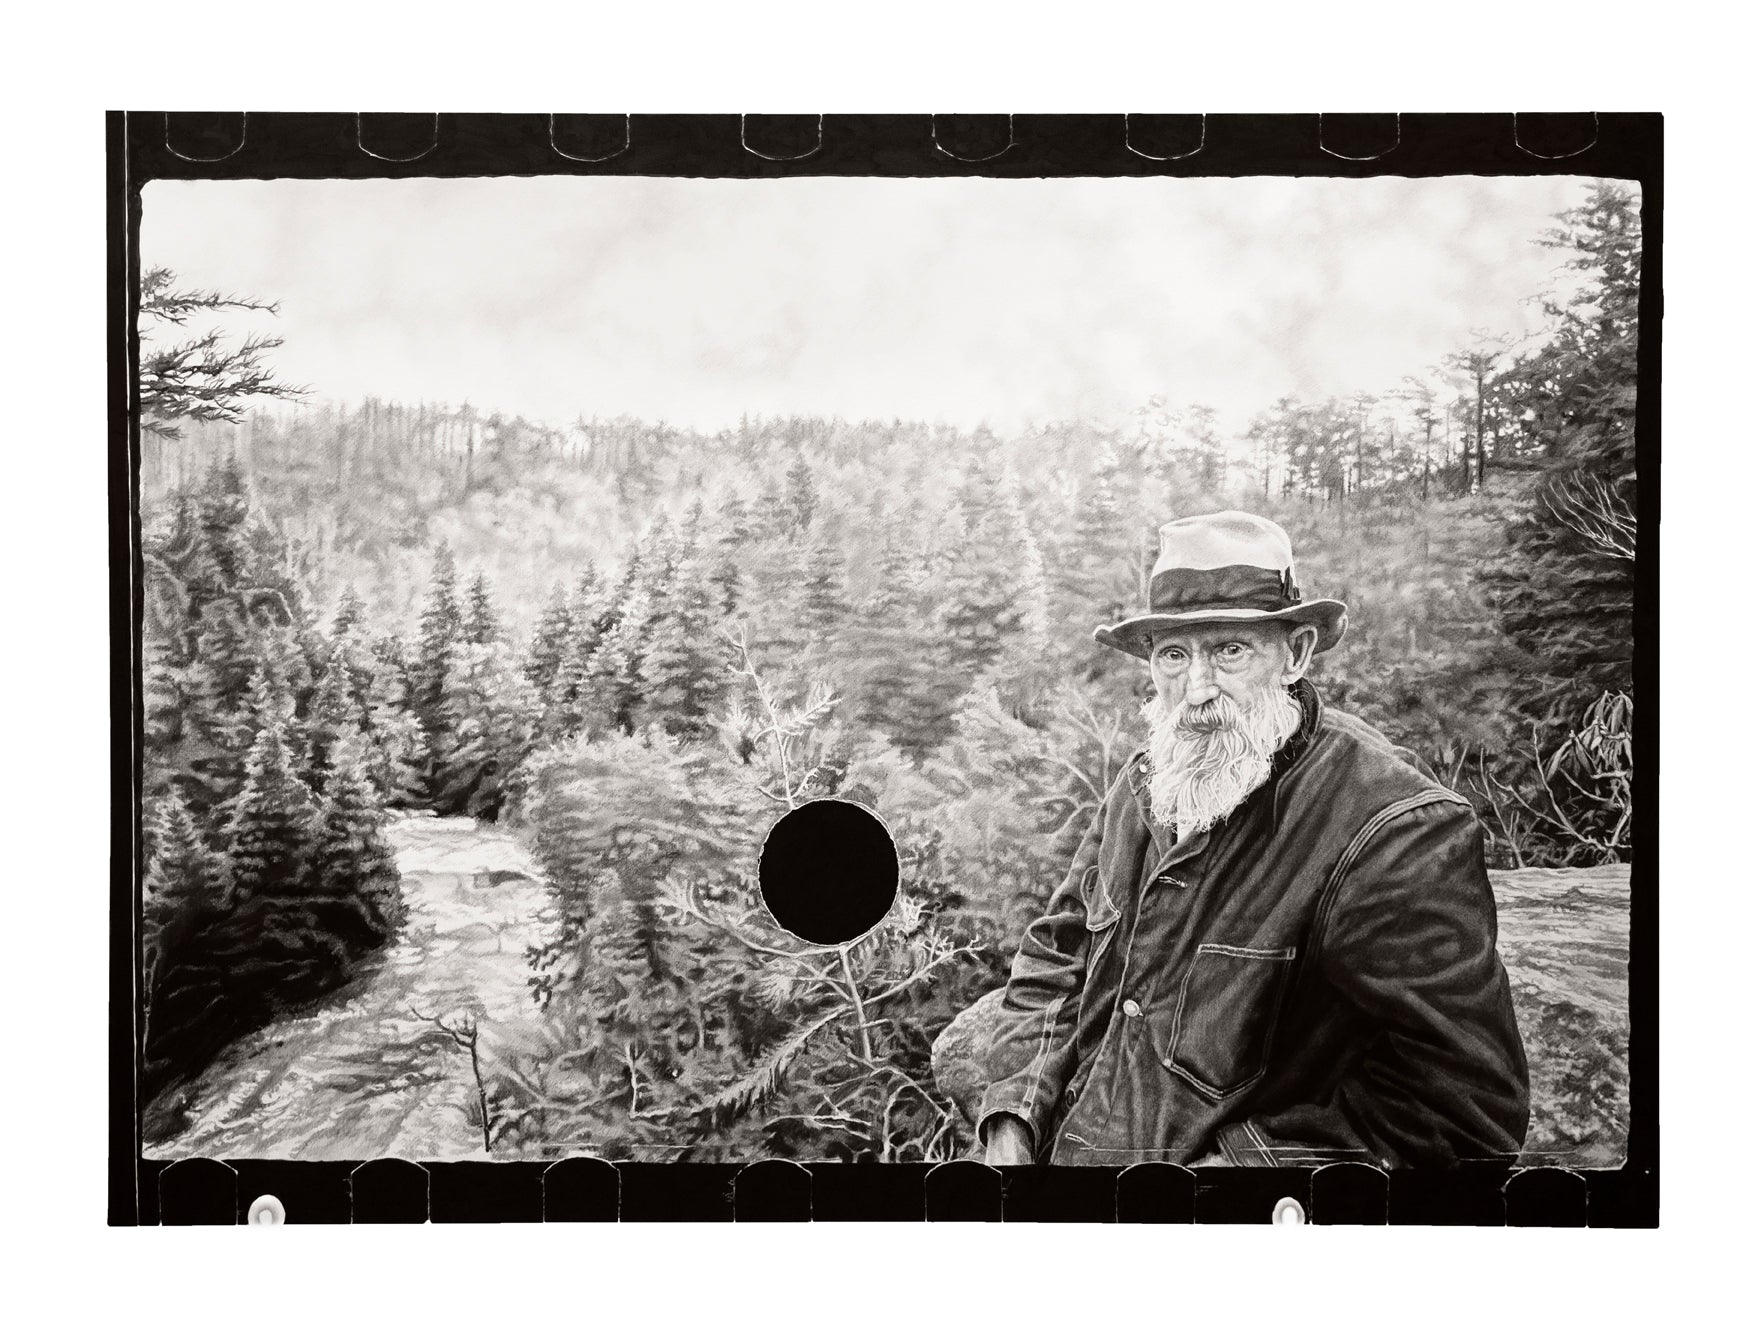 Joel Daniel Philips print of an elderly man with a beard wearing a hat out in the forrest